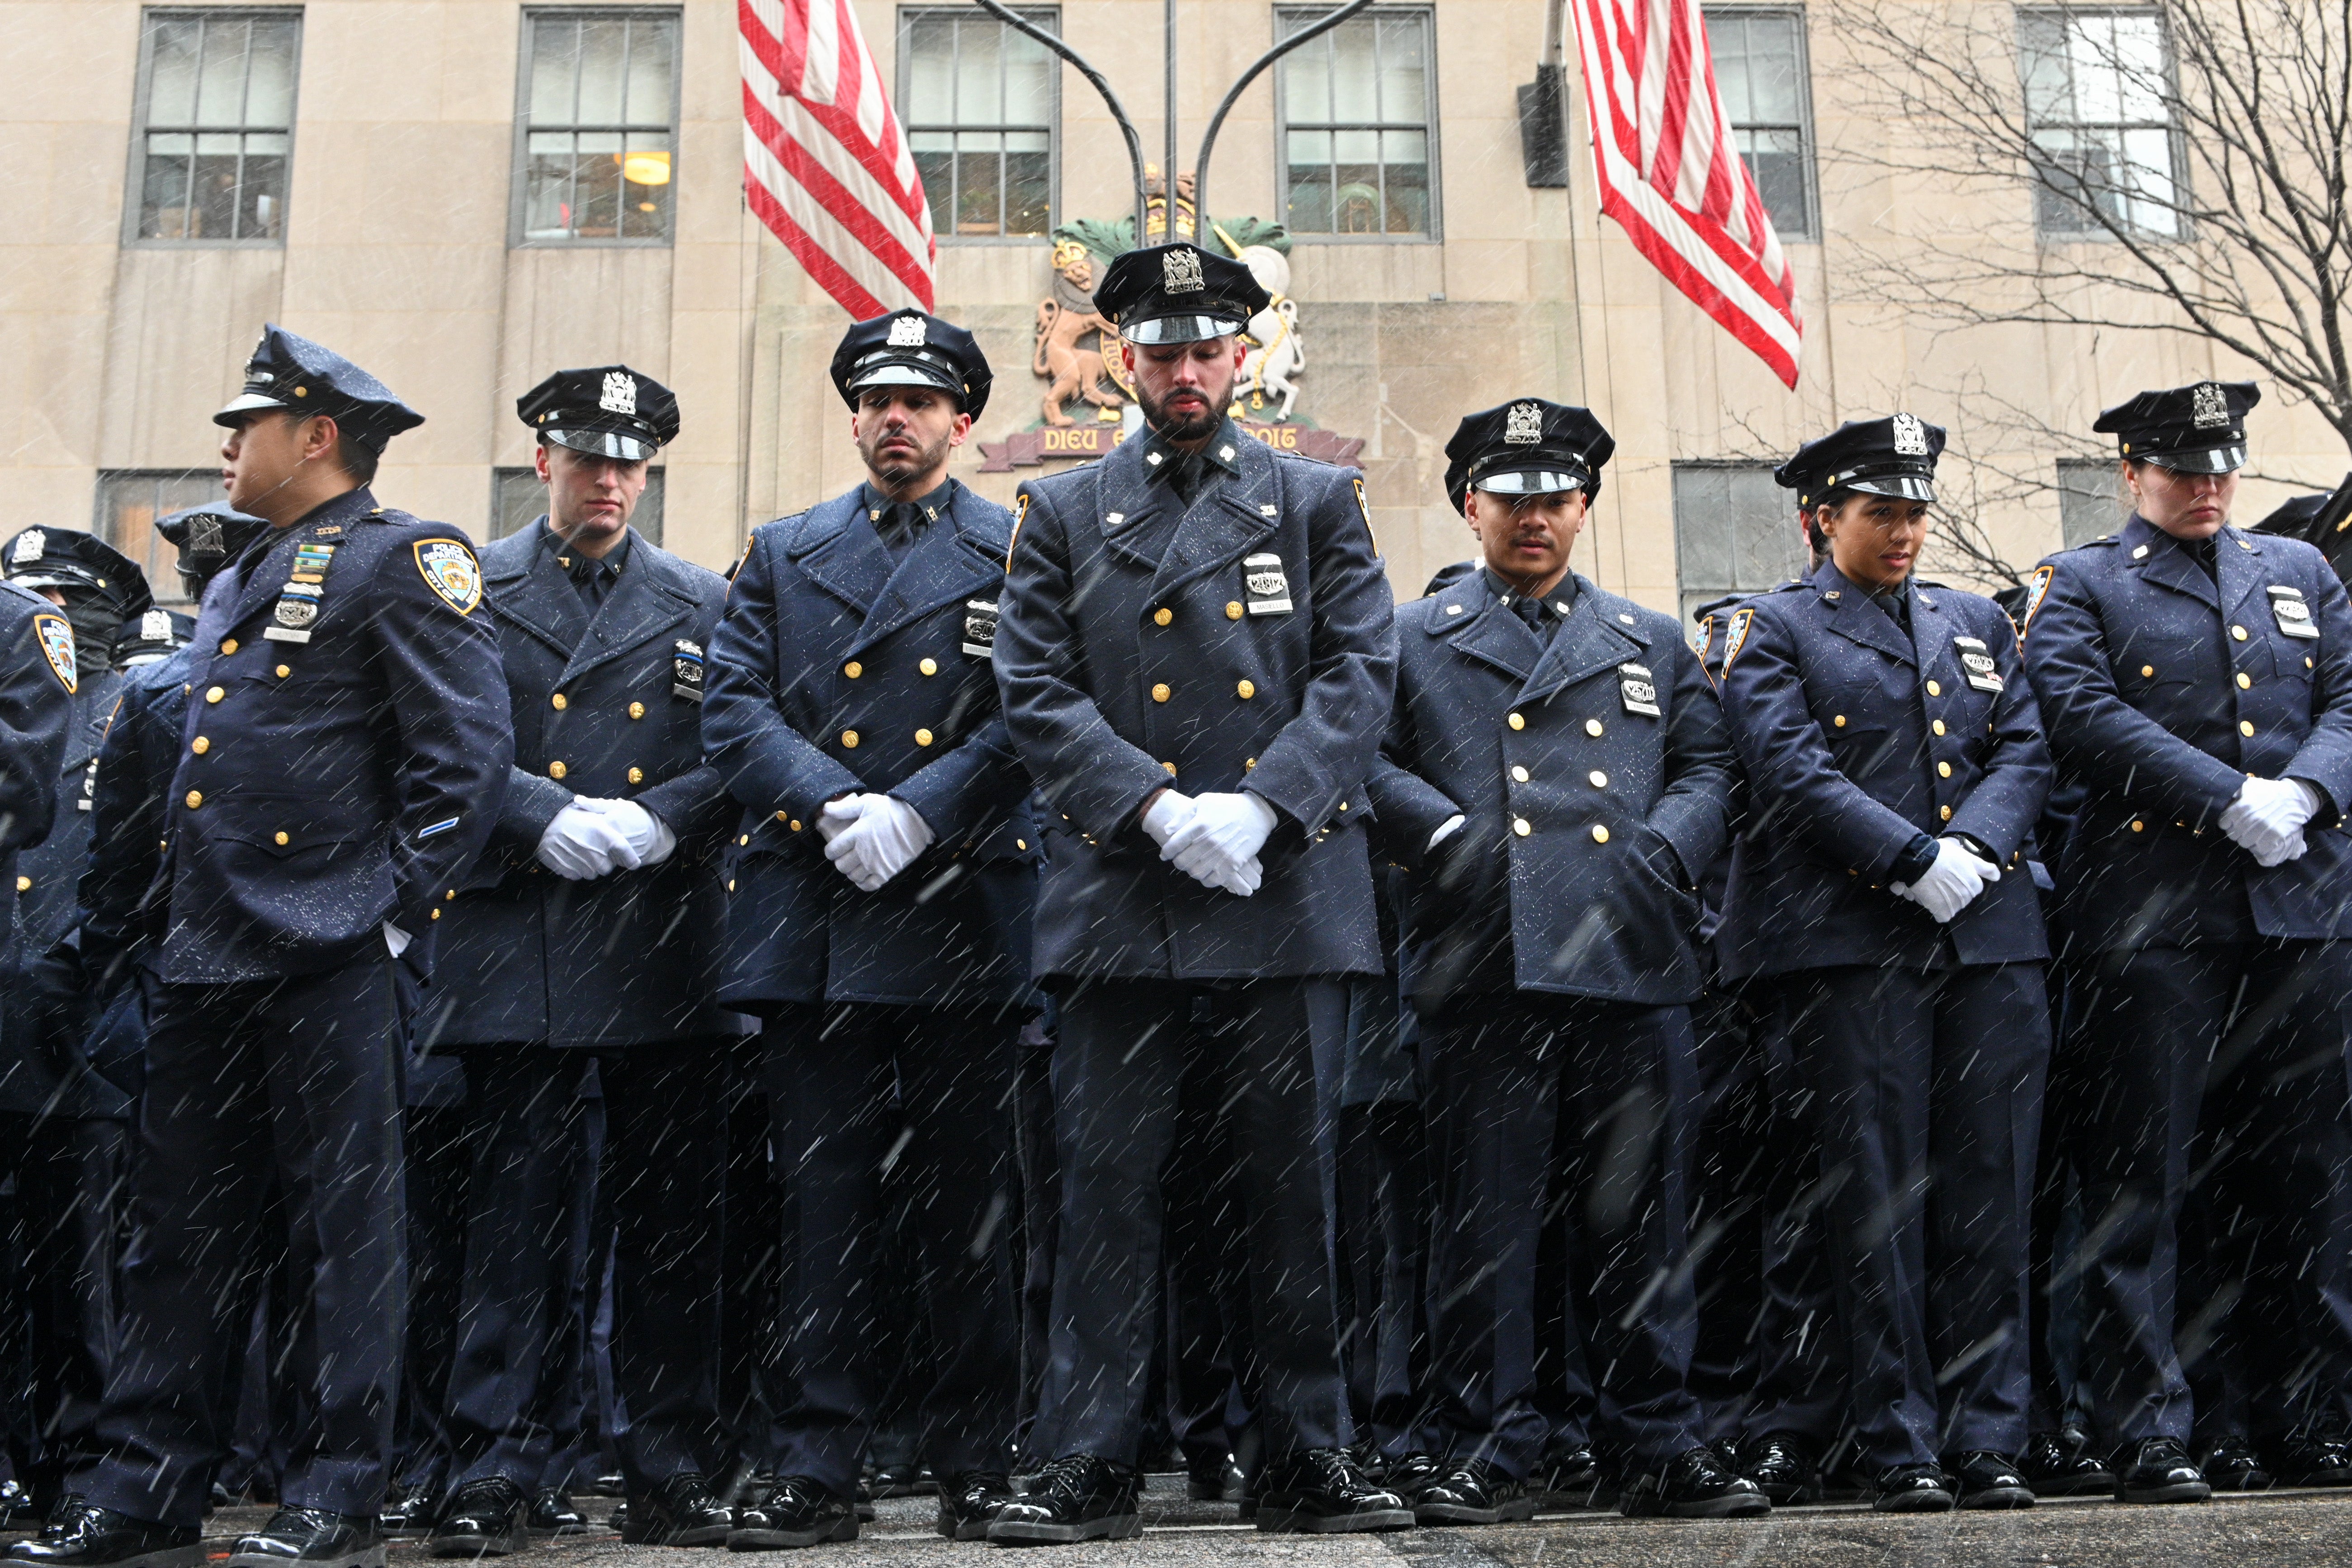 New York City Police Department officers mourn two officers fatally shot in January.